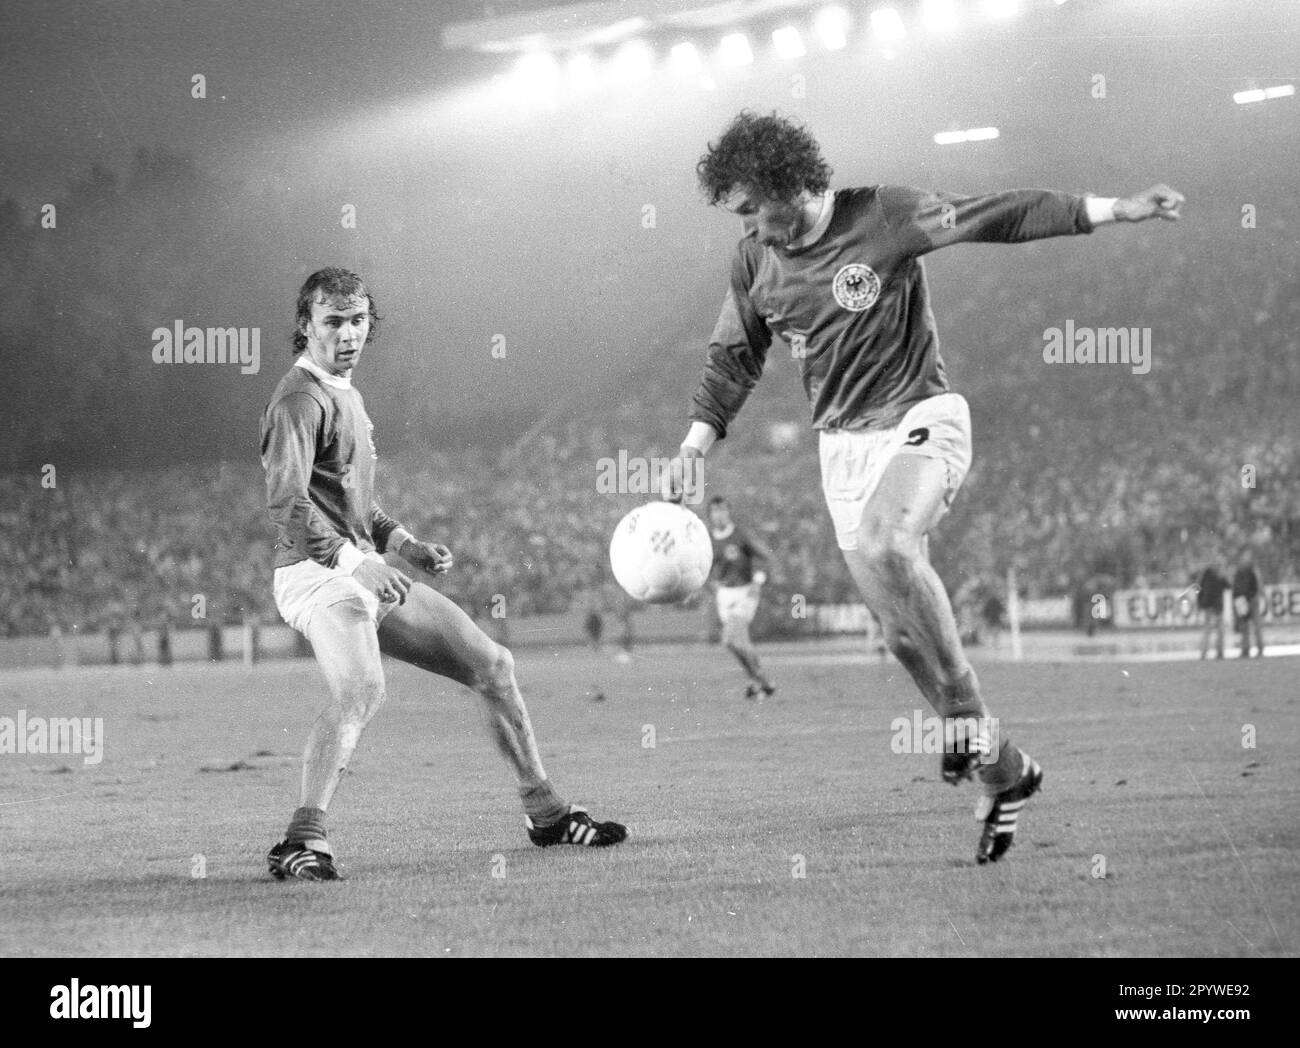 Soccer World Cup 1974 2nd round / BR Germany - Sweden 4:2 / 30.06.1974 in Duesseldorf / Paul Breitner in action, left Bernd Hölzenbein looks on [automated translation] Stock Photo